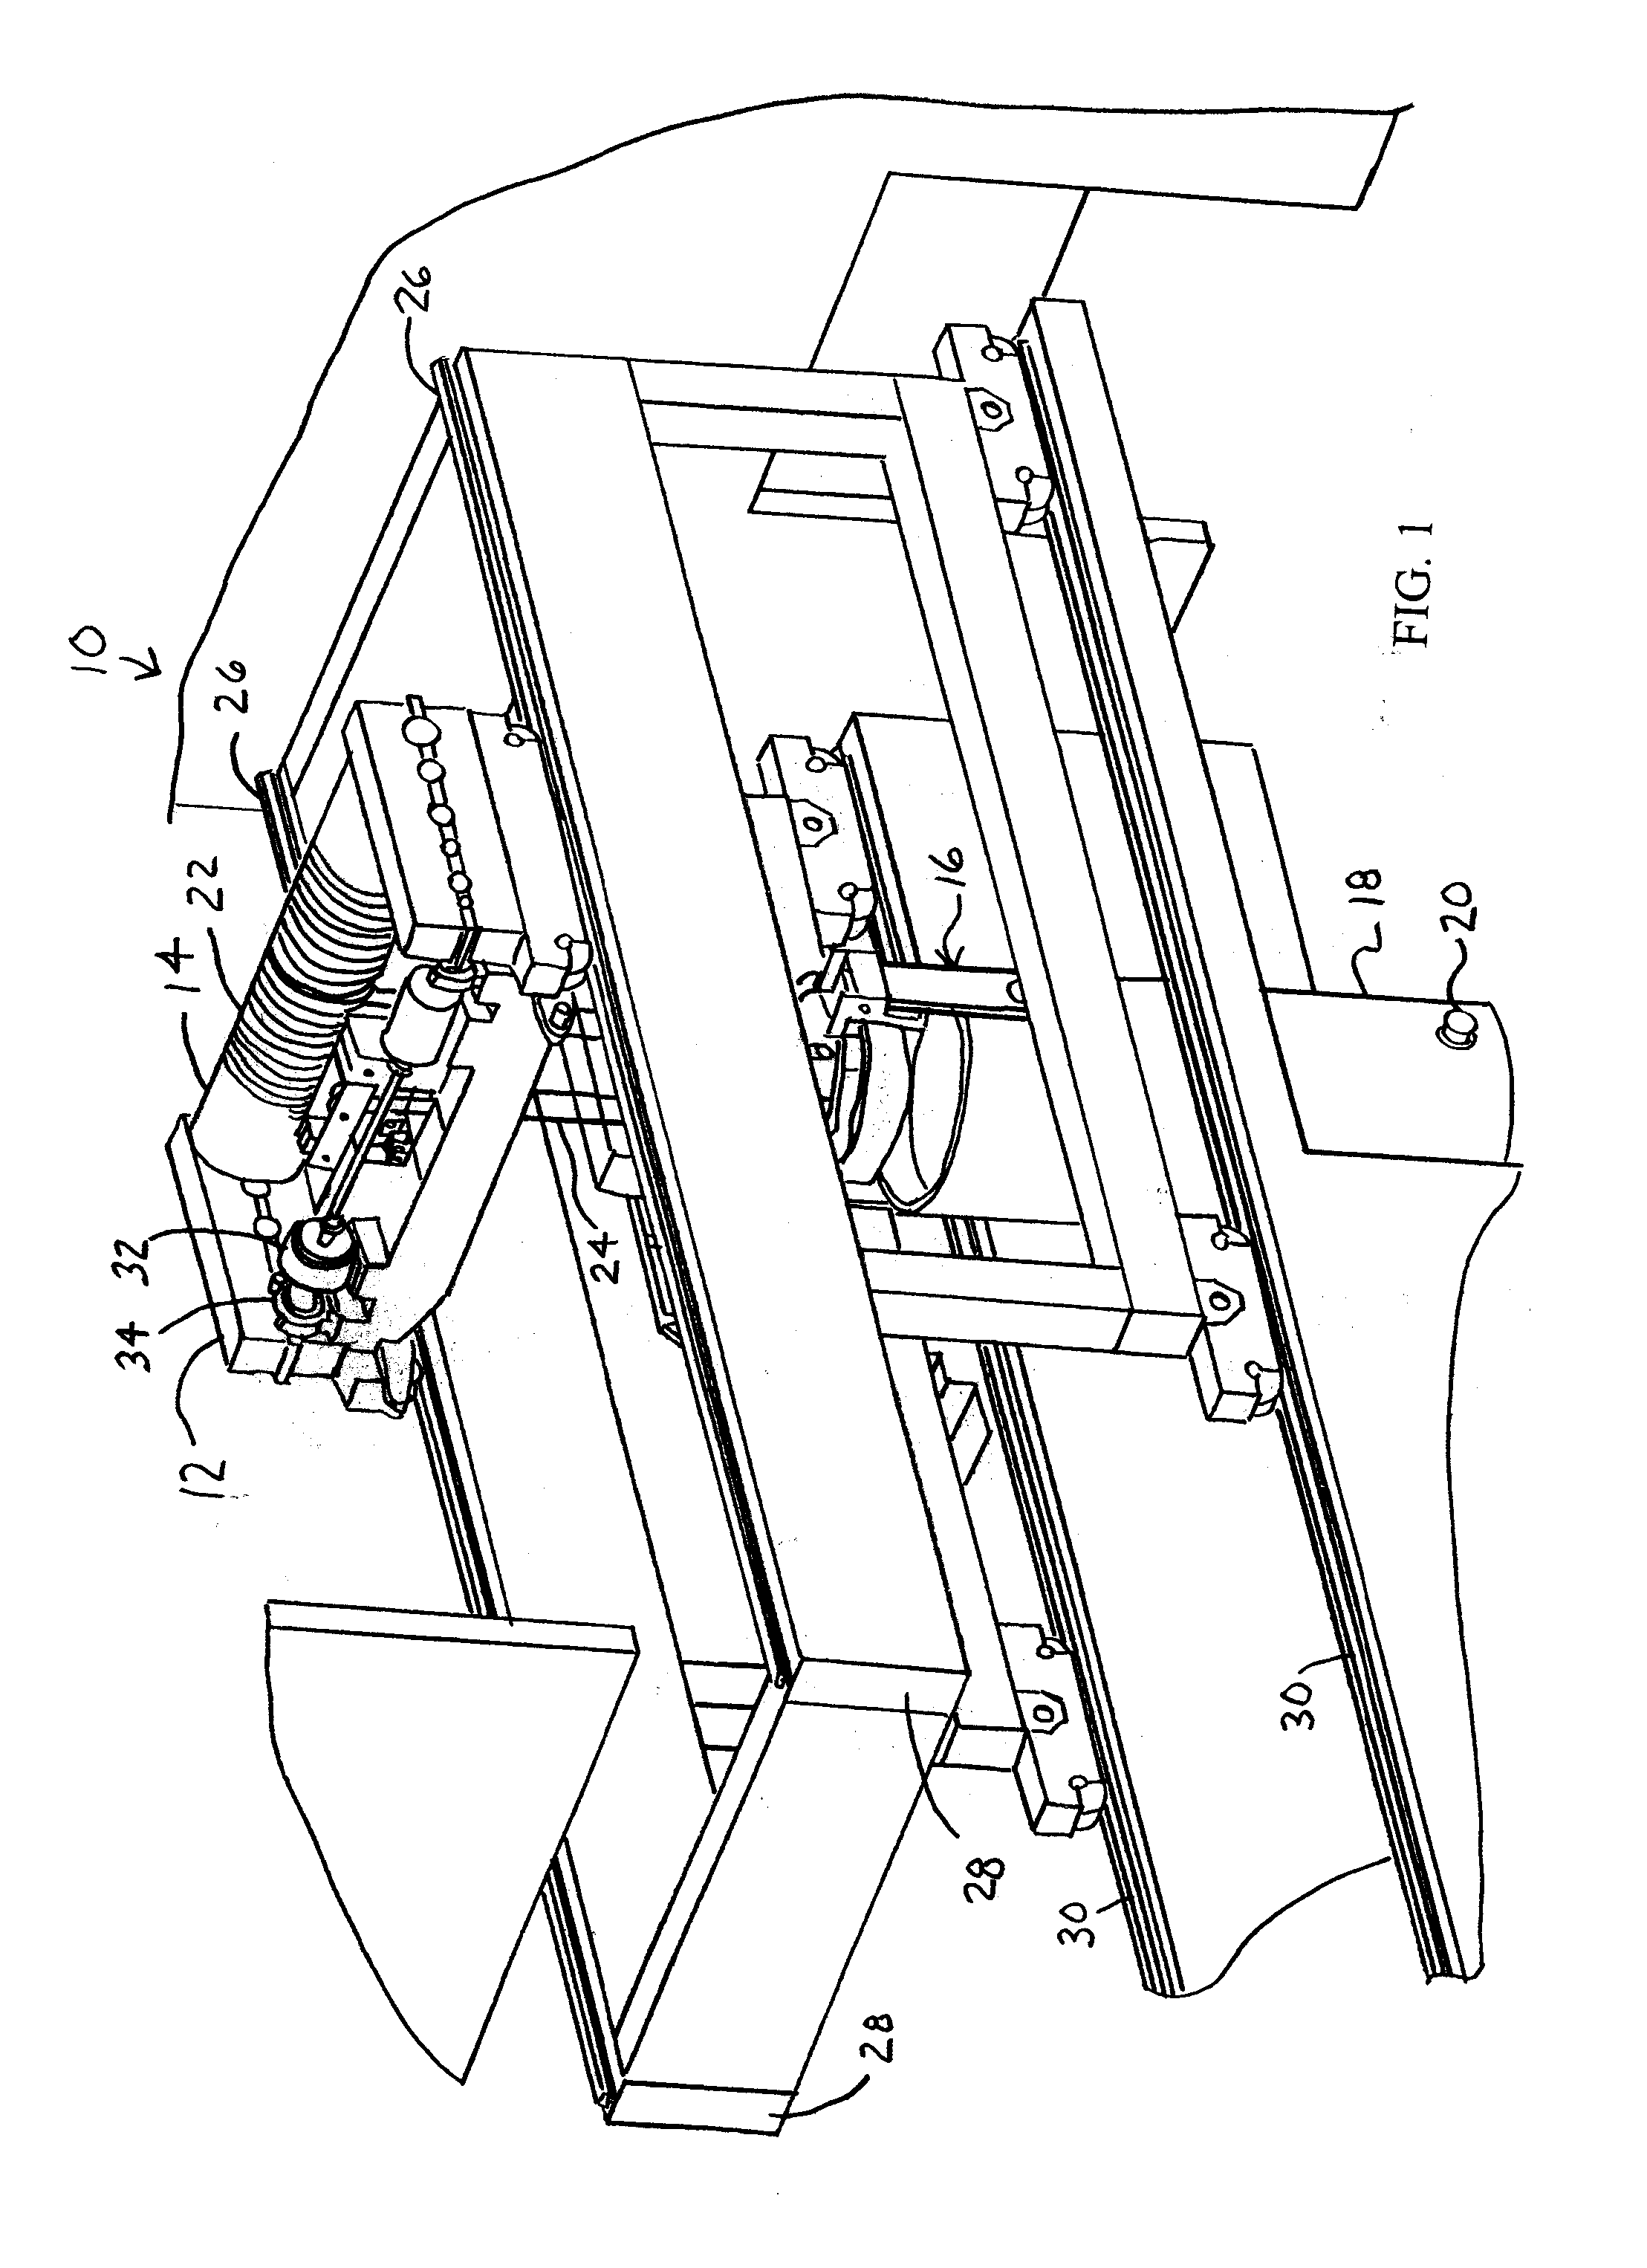 Bottom block assembly with pivoting trunnion paddles